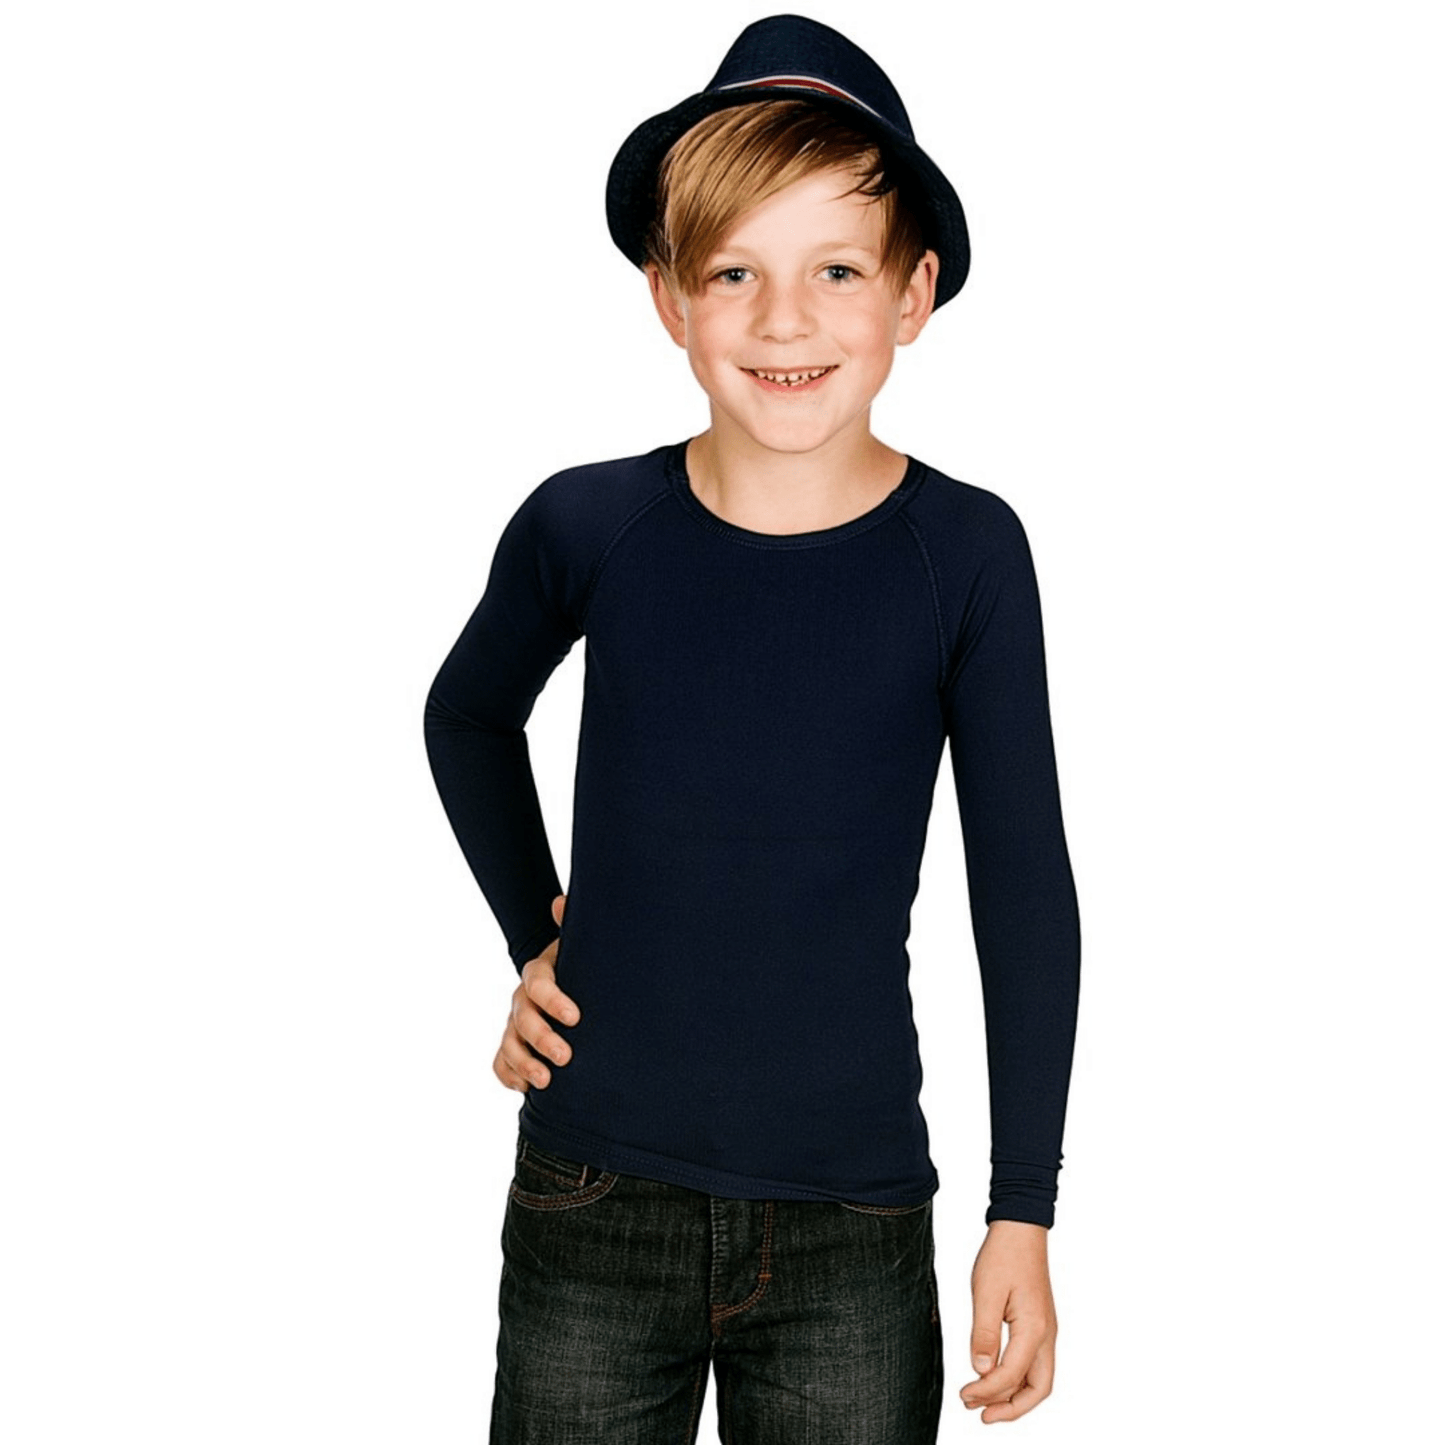 CALM Kids Sensory Compression Long Sleeve Top - Navy - Caring Clothing